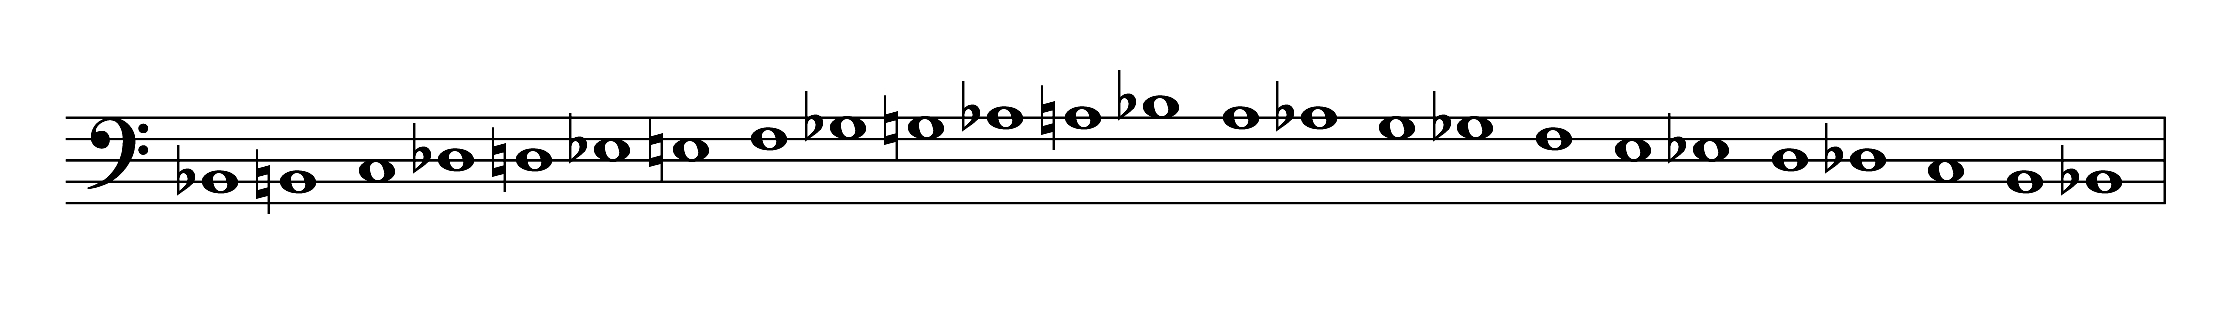 A chromatic scale from B-flat 2 to B-flat 3 shown ascending and descending on a staff.